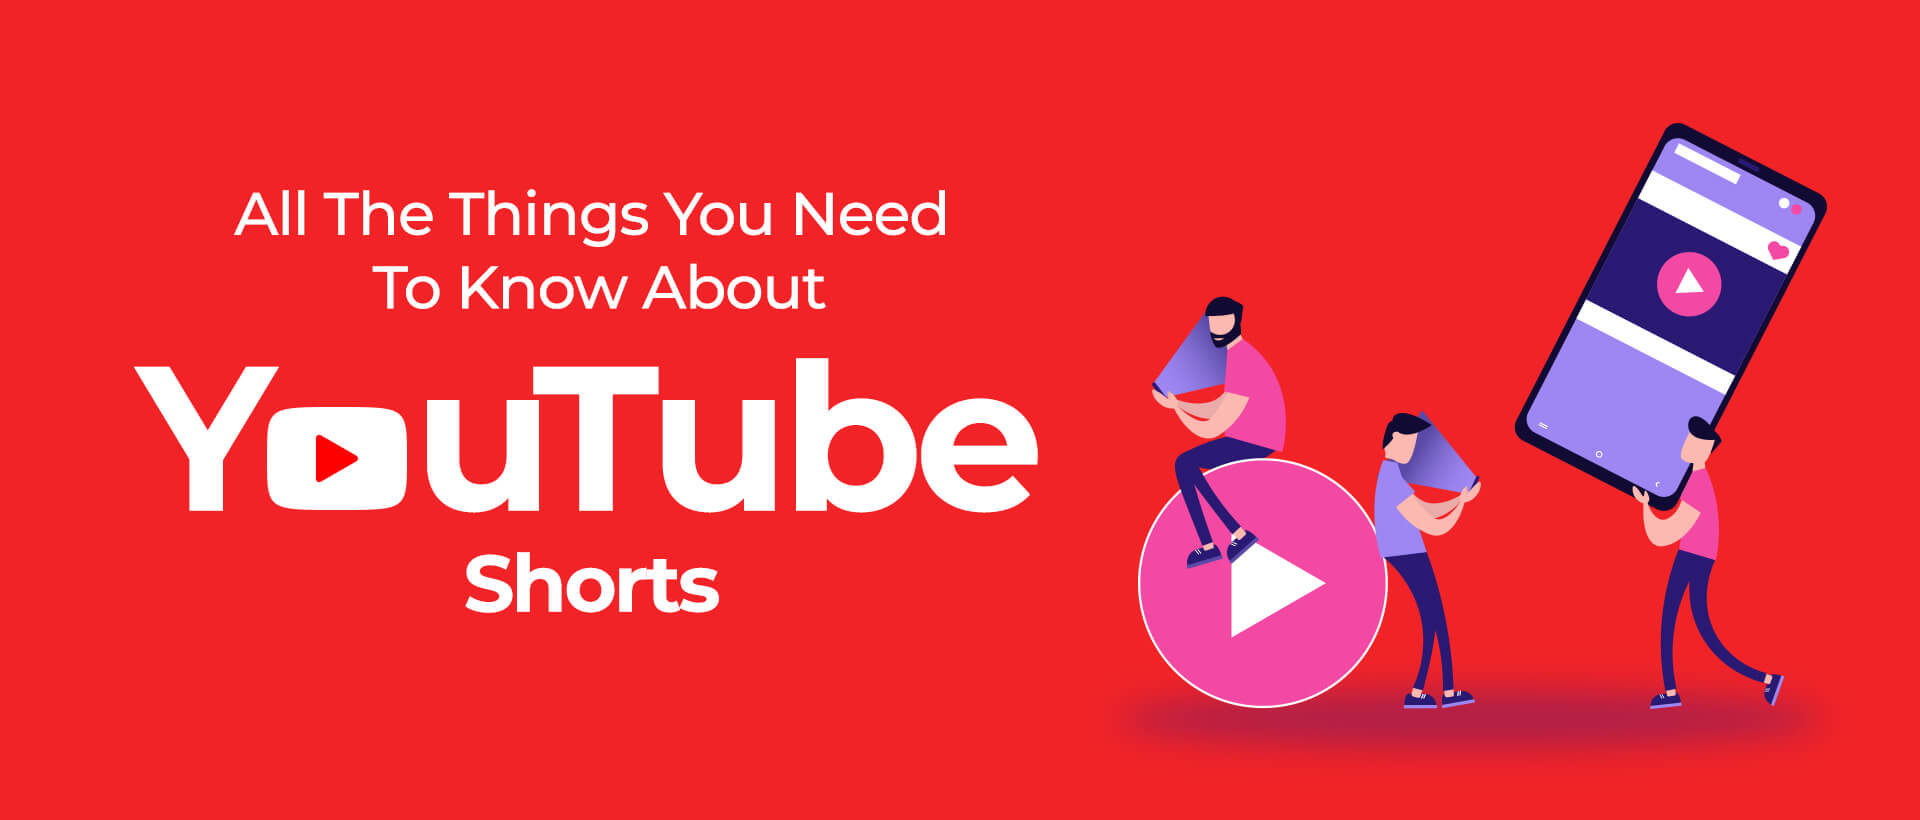 All The Things You Need to Know About YouTube Shorts